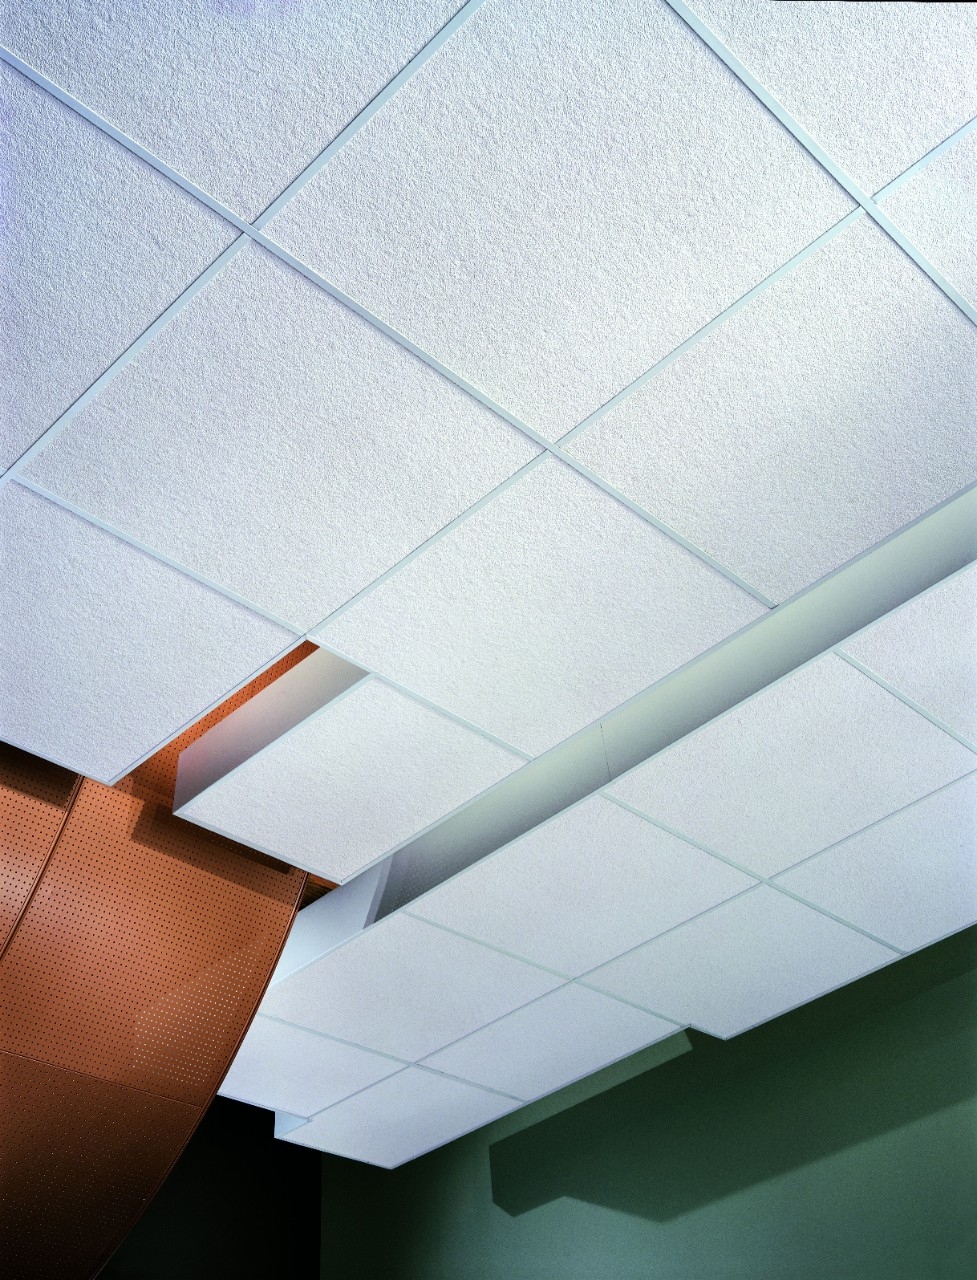 Class A Fire Retardant Ceiling Tilesusg astro acoustical panels fire rated ceiling tiles